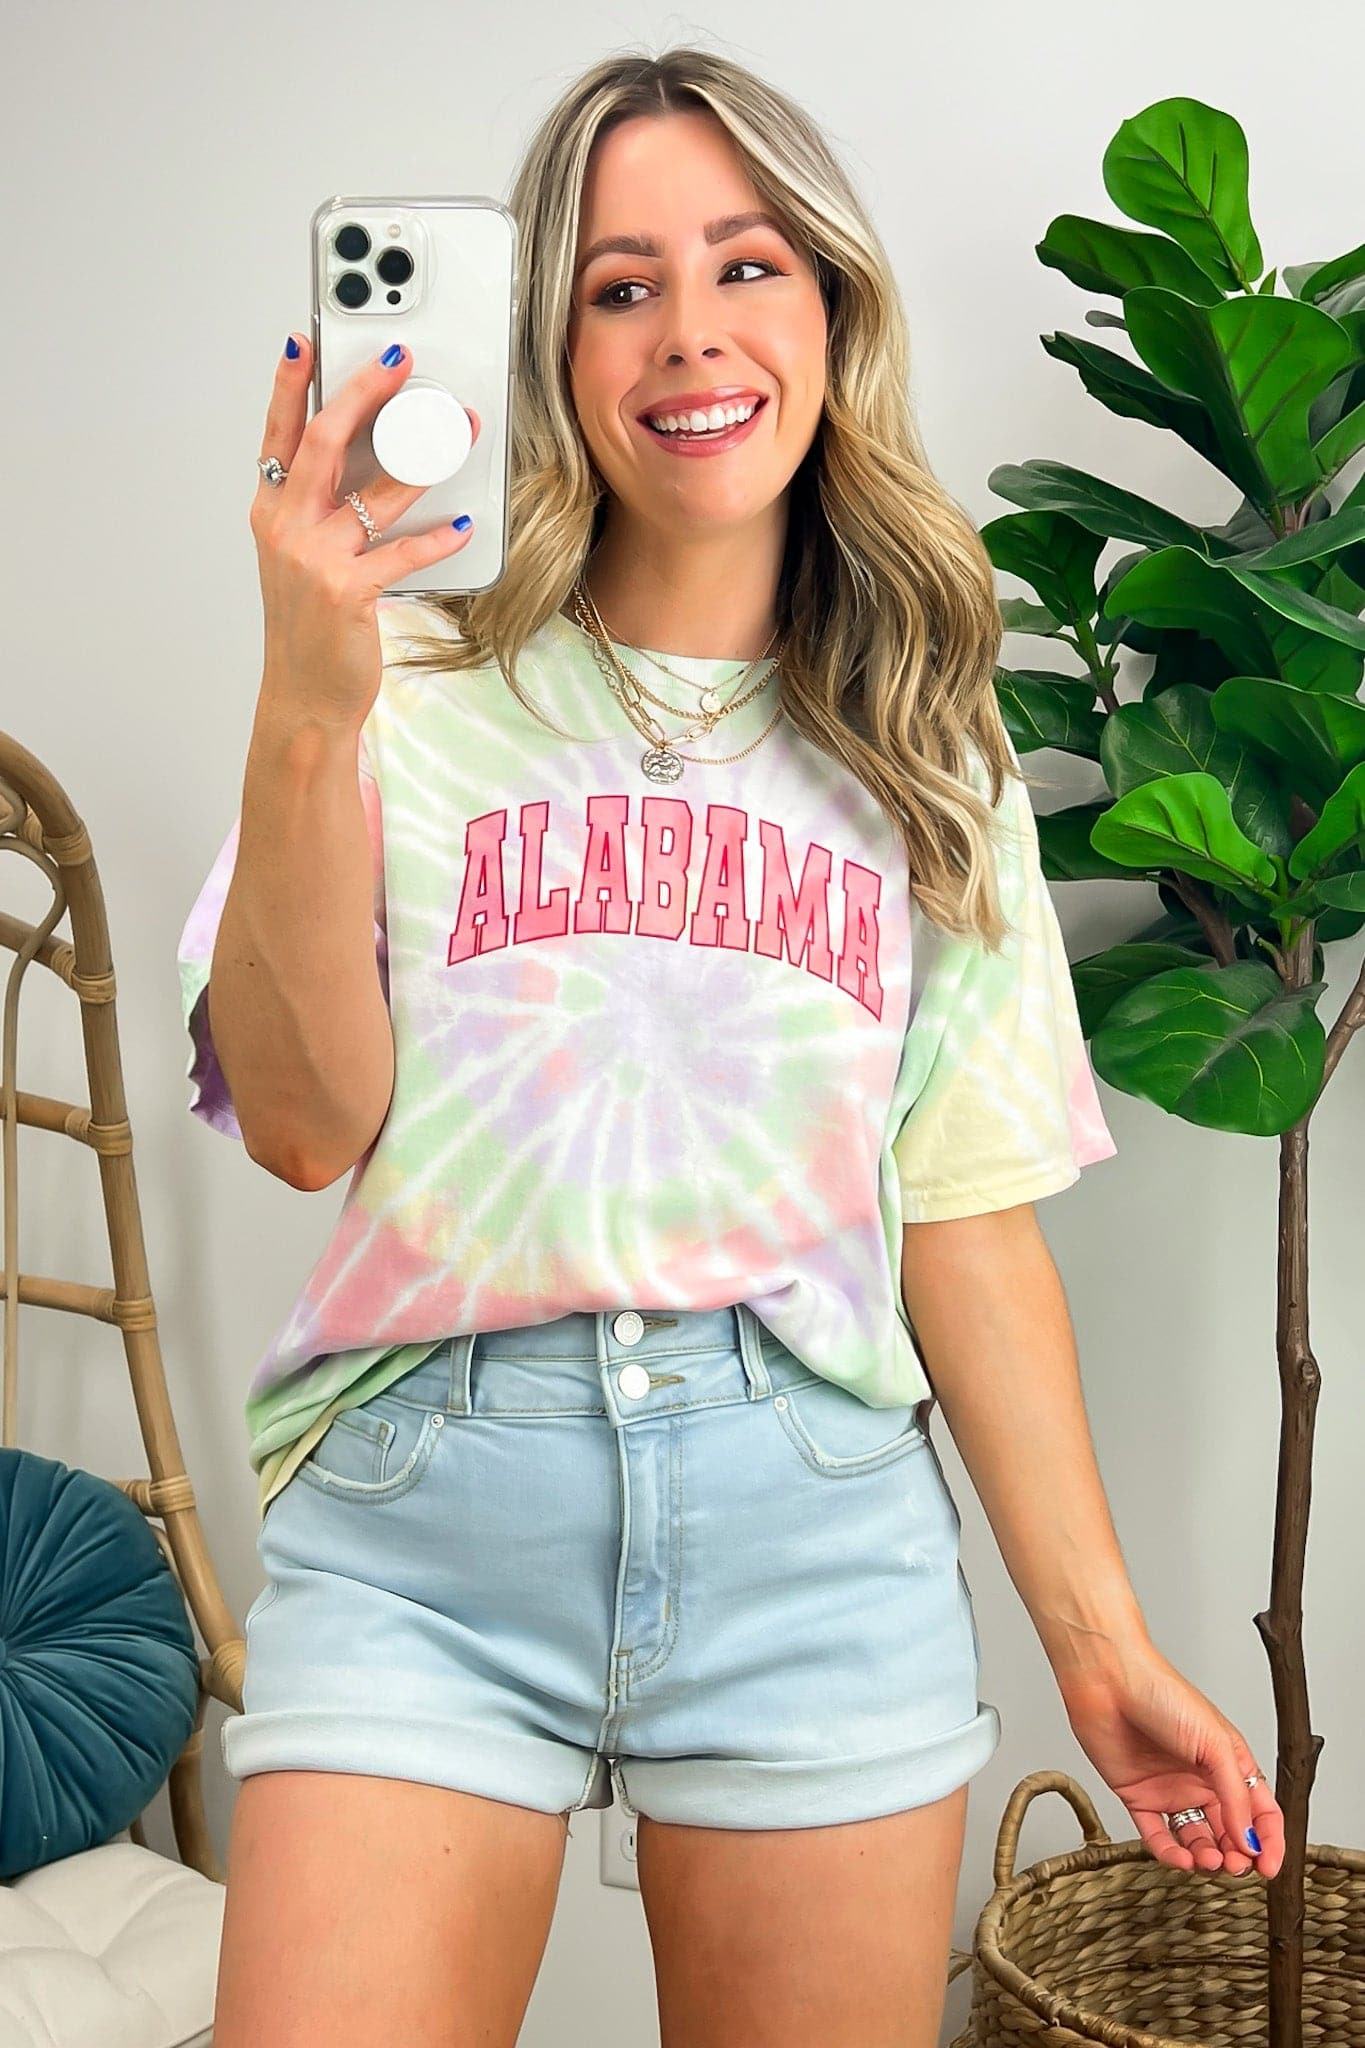  Alabama Tie Dye Oversized Graphic Tee - FINAL SALE - Madison and Mallory